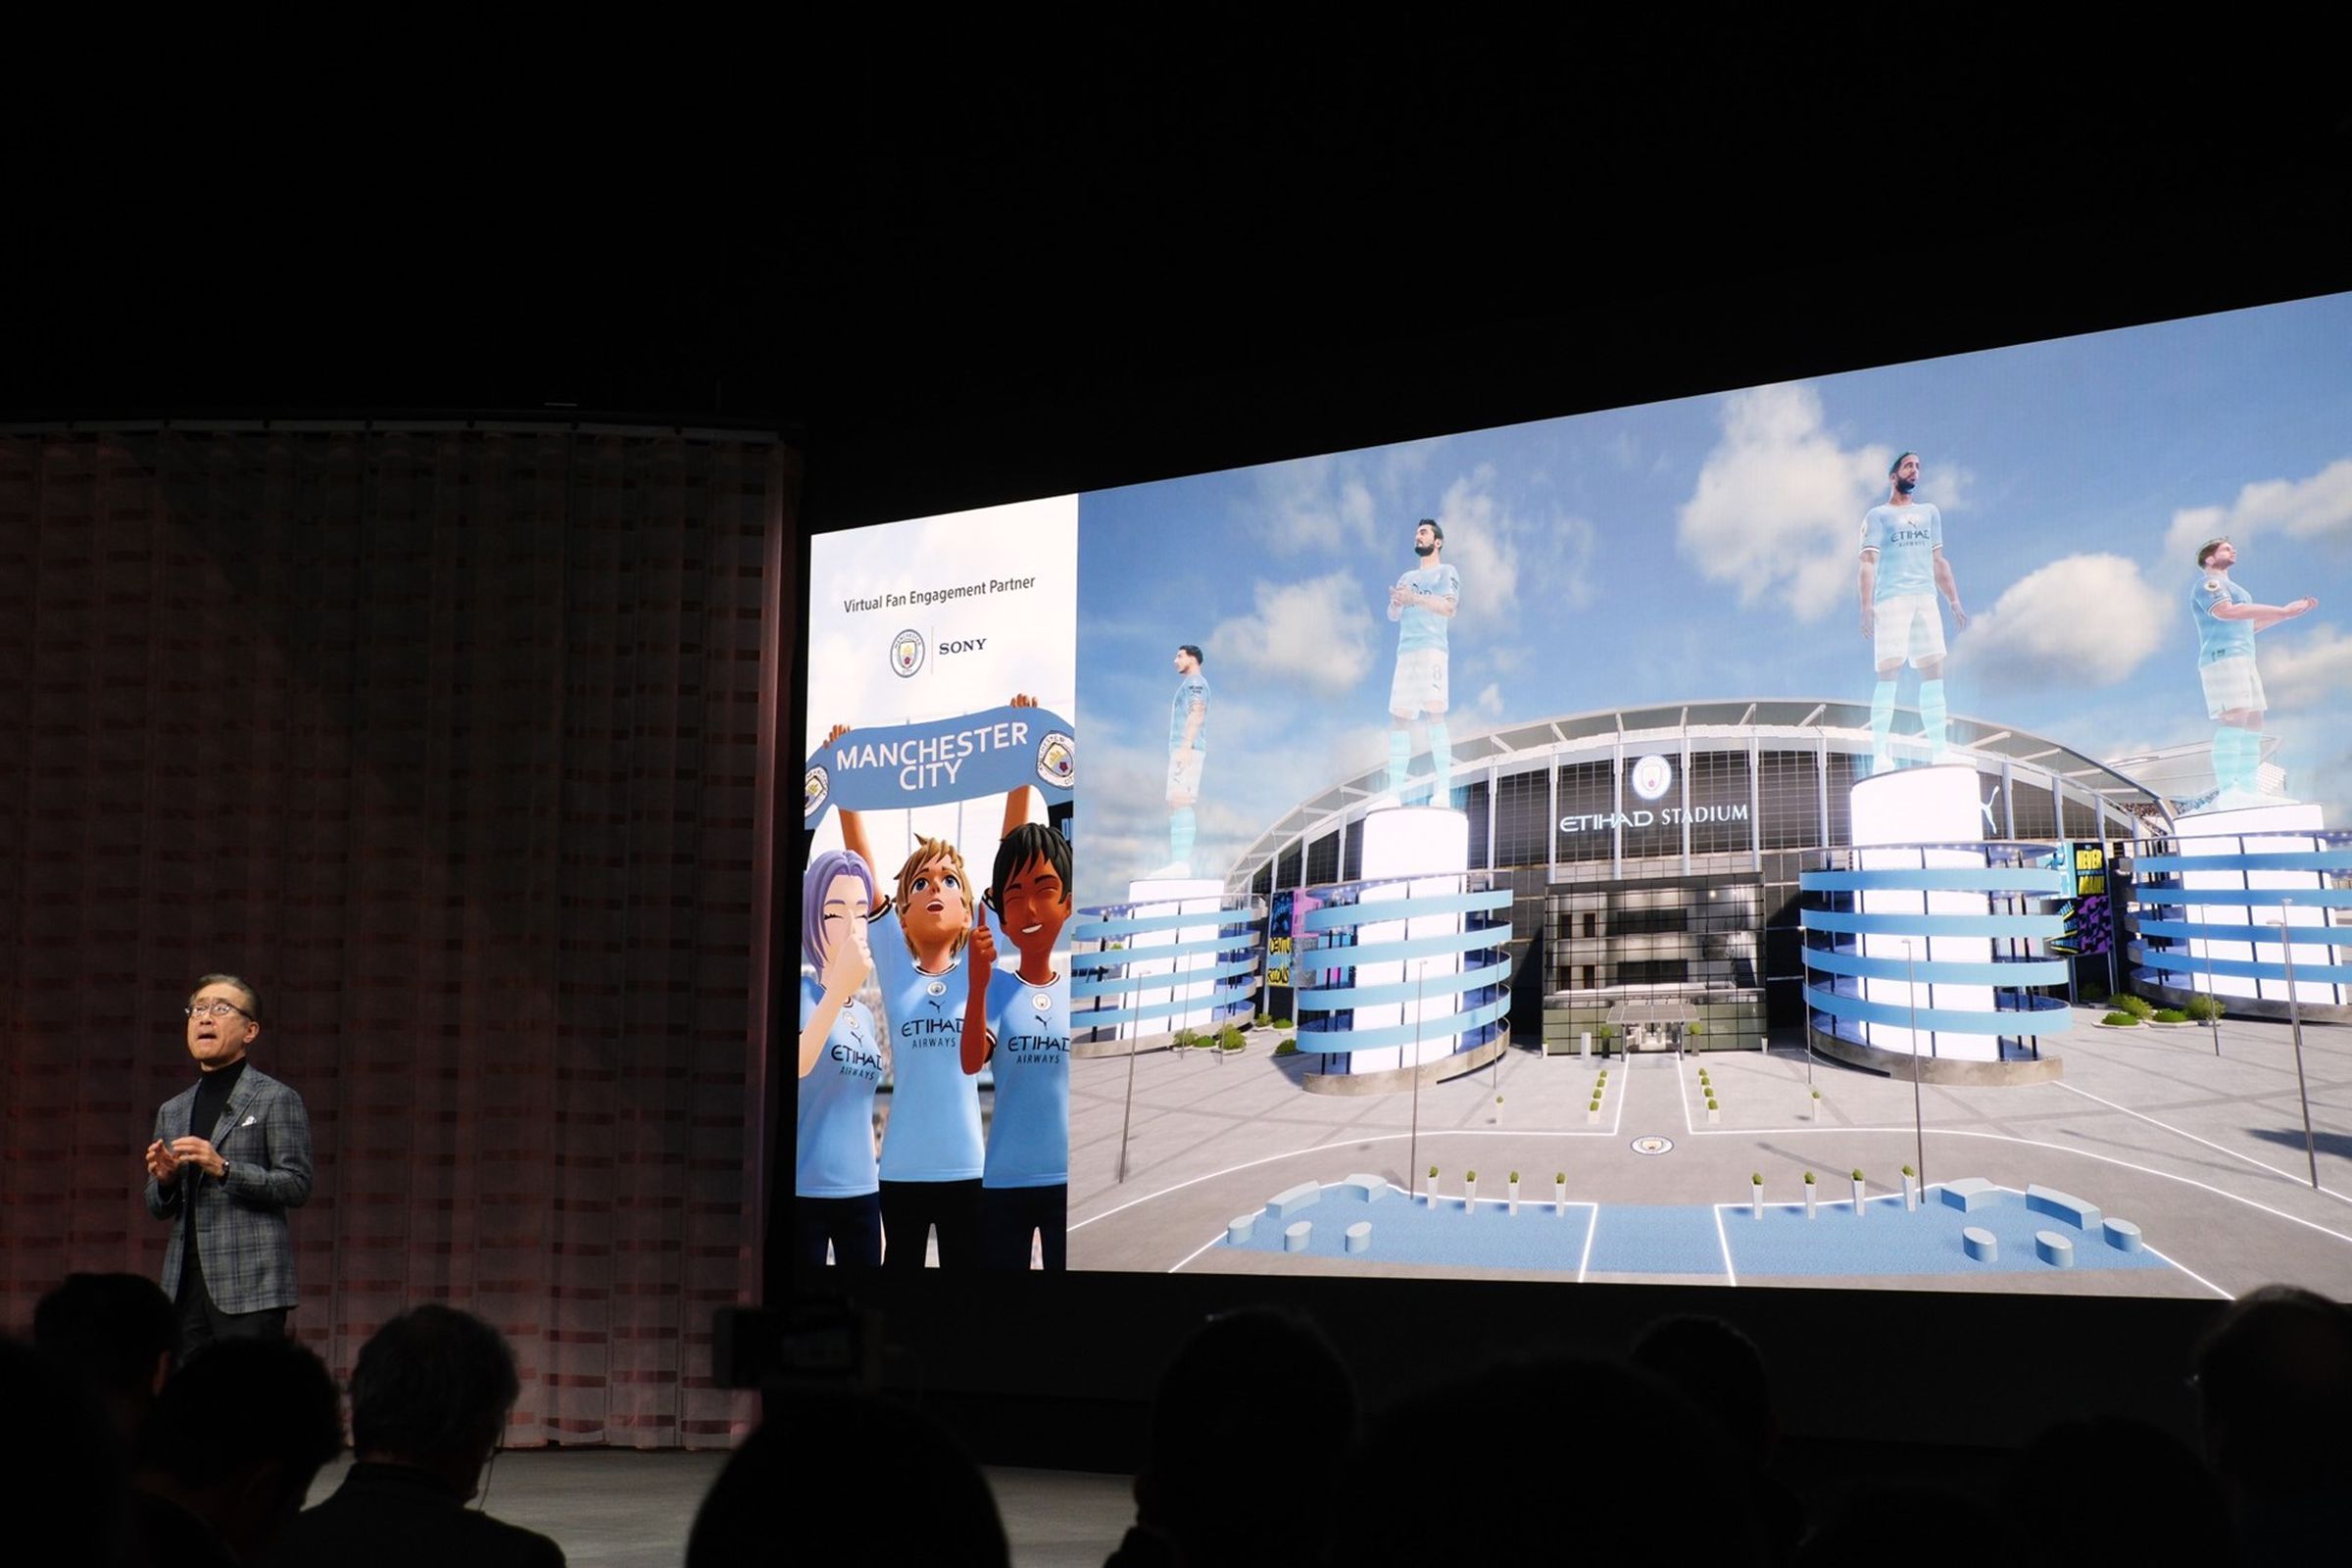 Sony and Manchester City are building a metaverse, but they need to prove why we should visit